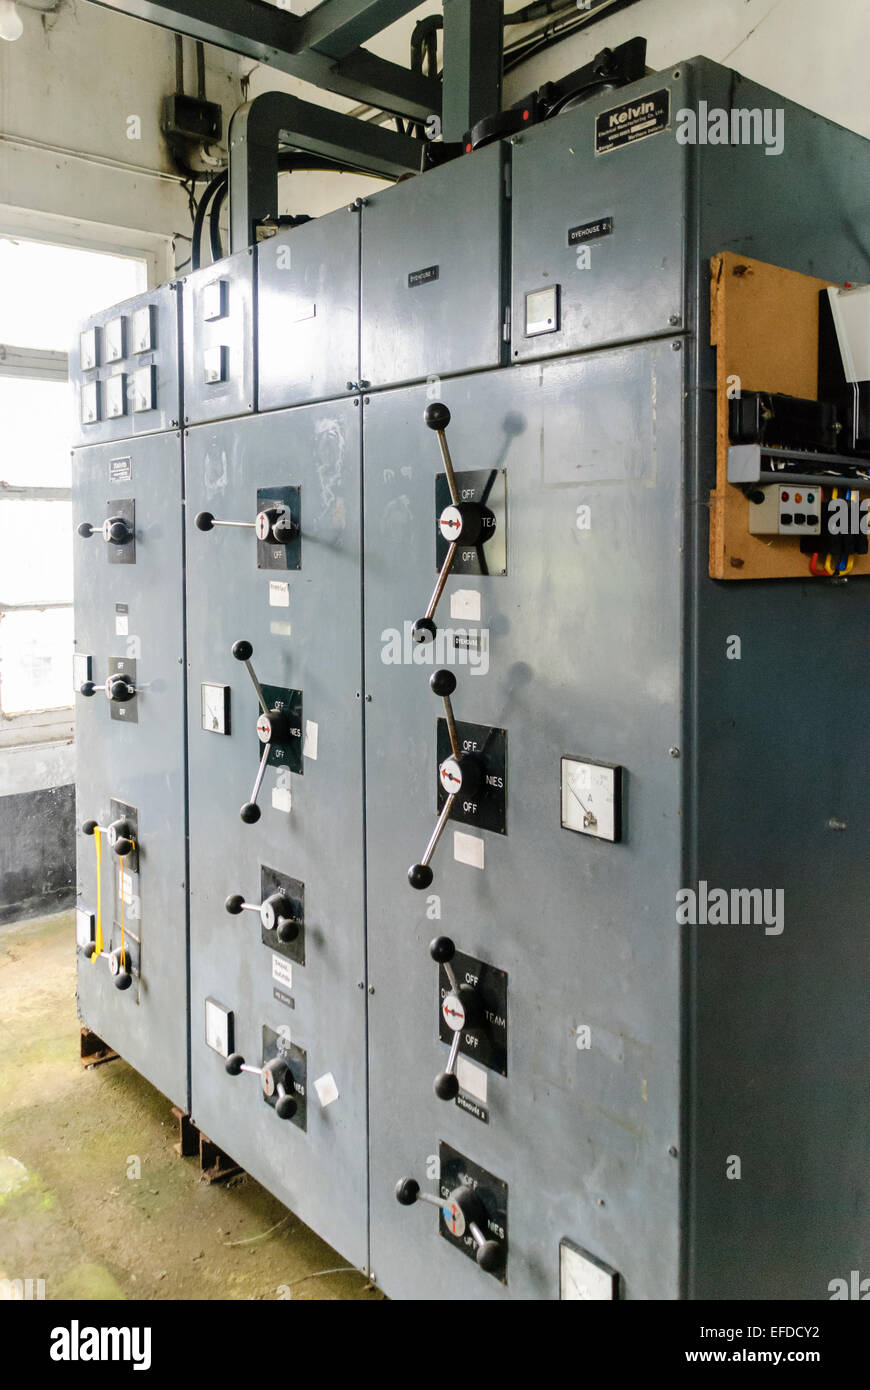 Electrical switchgear with gauges and four-way rotary switches Stock Photo